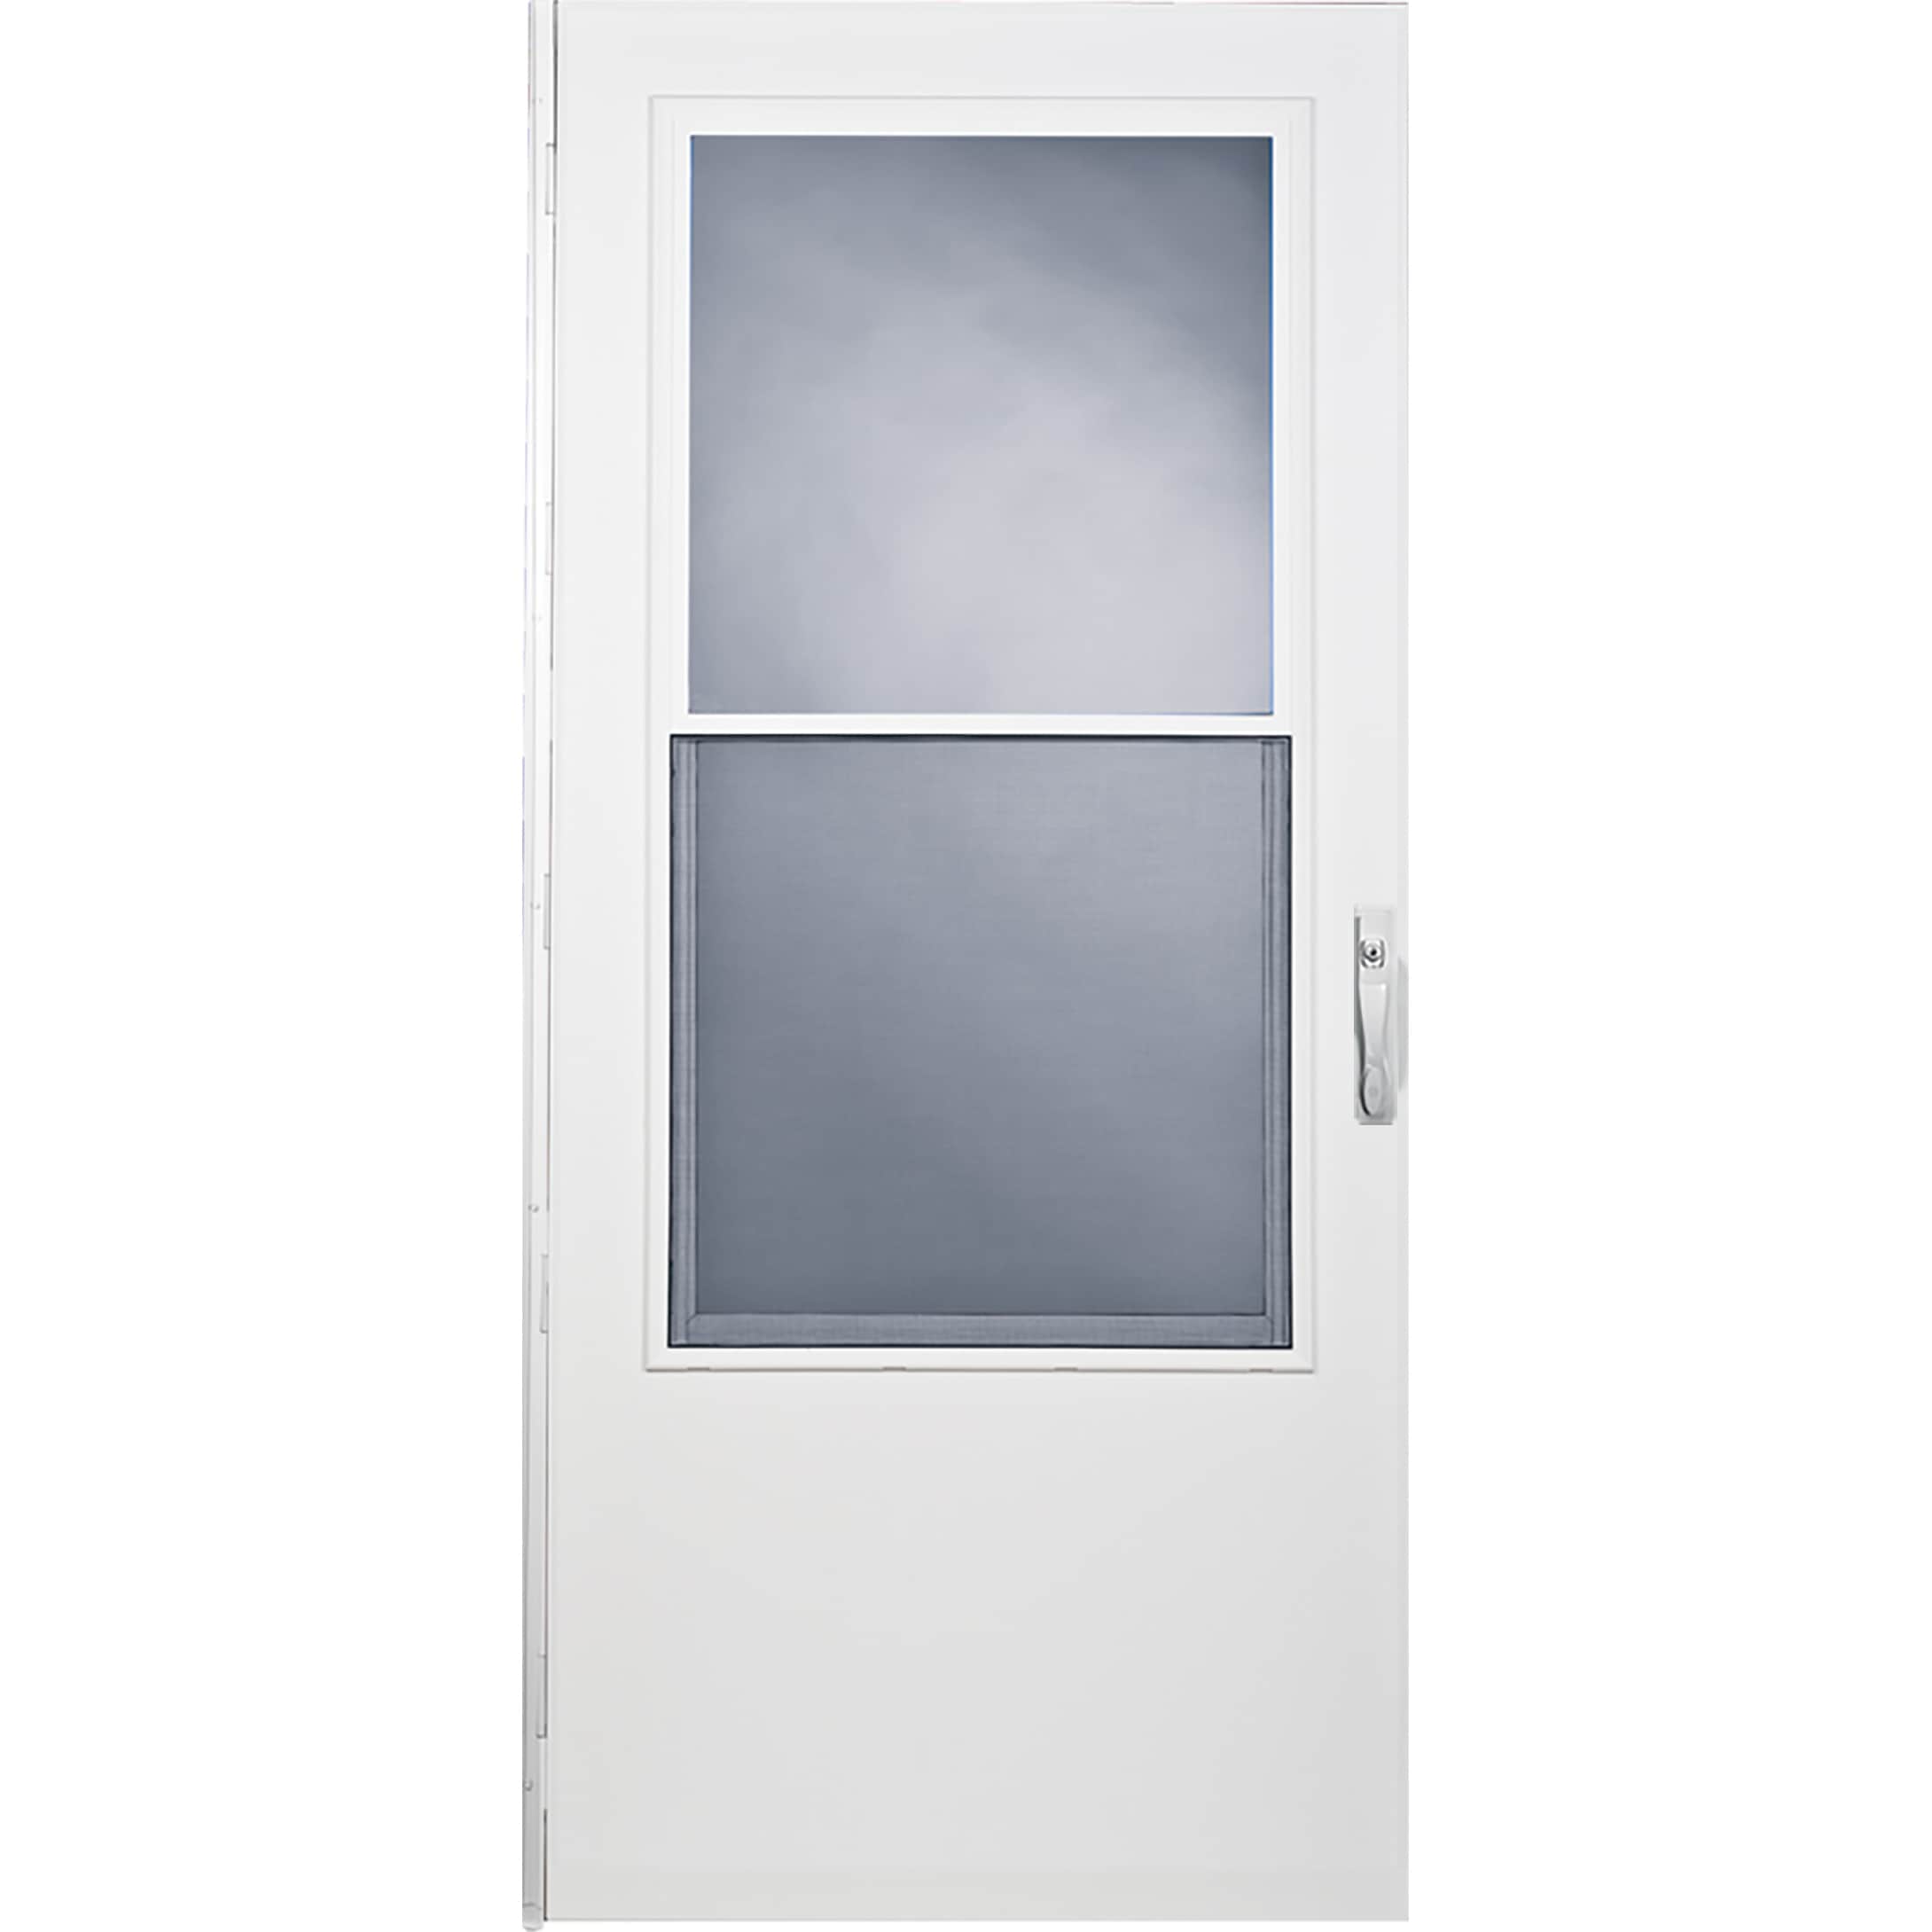 West Point 36-in x 78-in White Mid-view Self-storing Wood Core Storm Door with White Handle | - LARSON 37098326